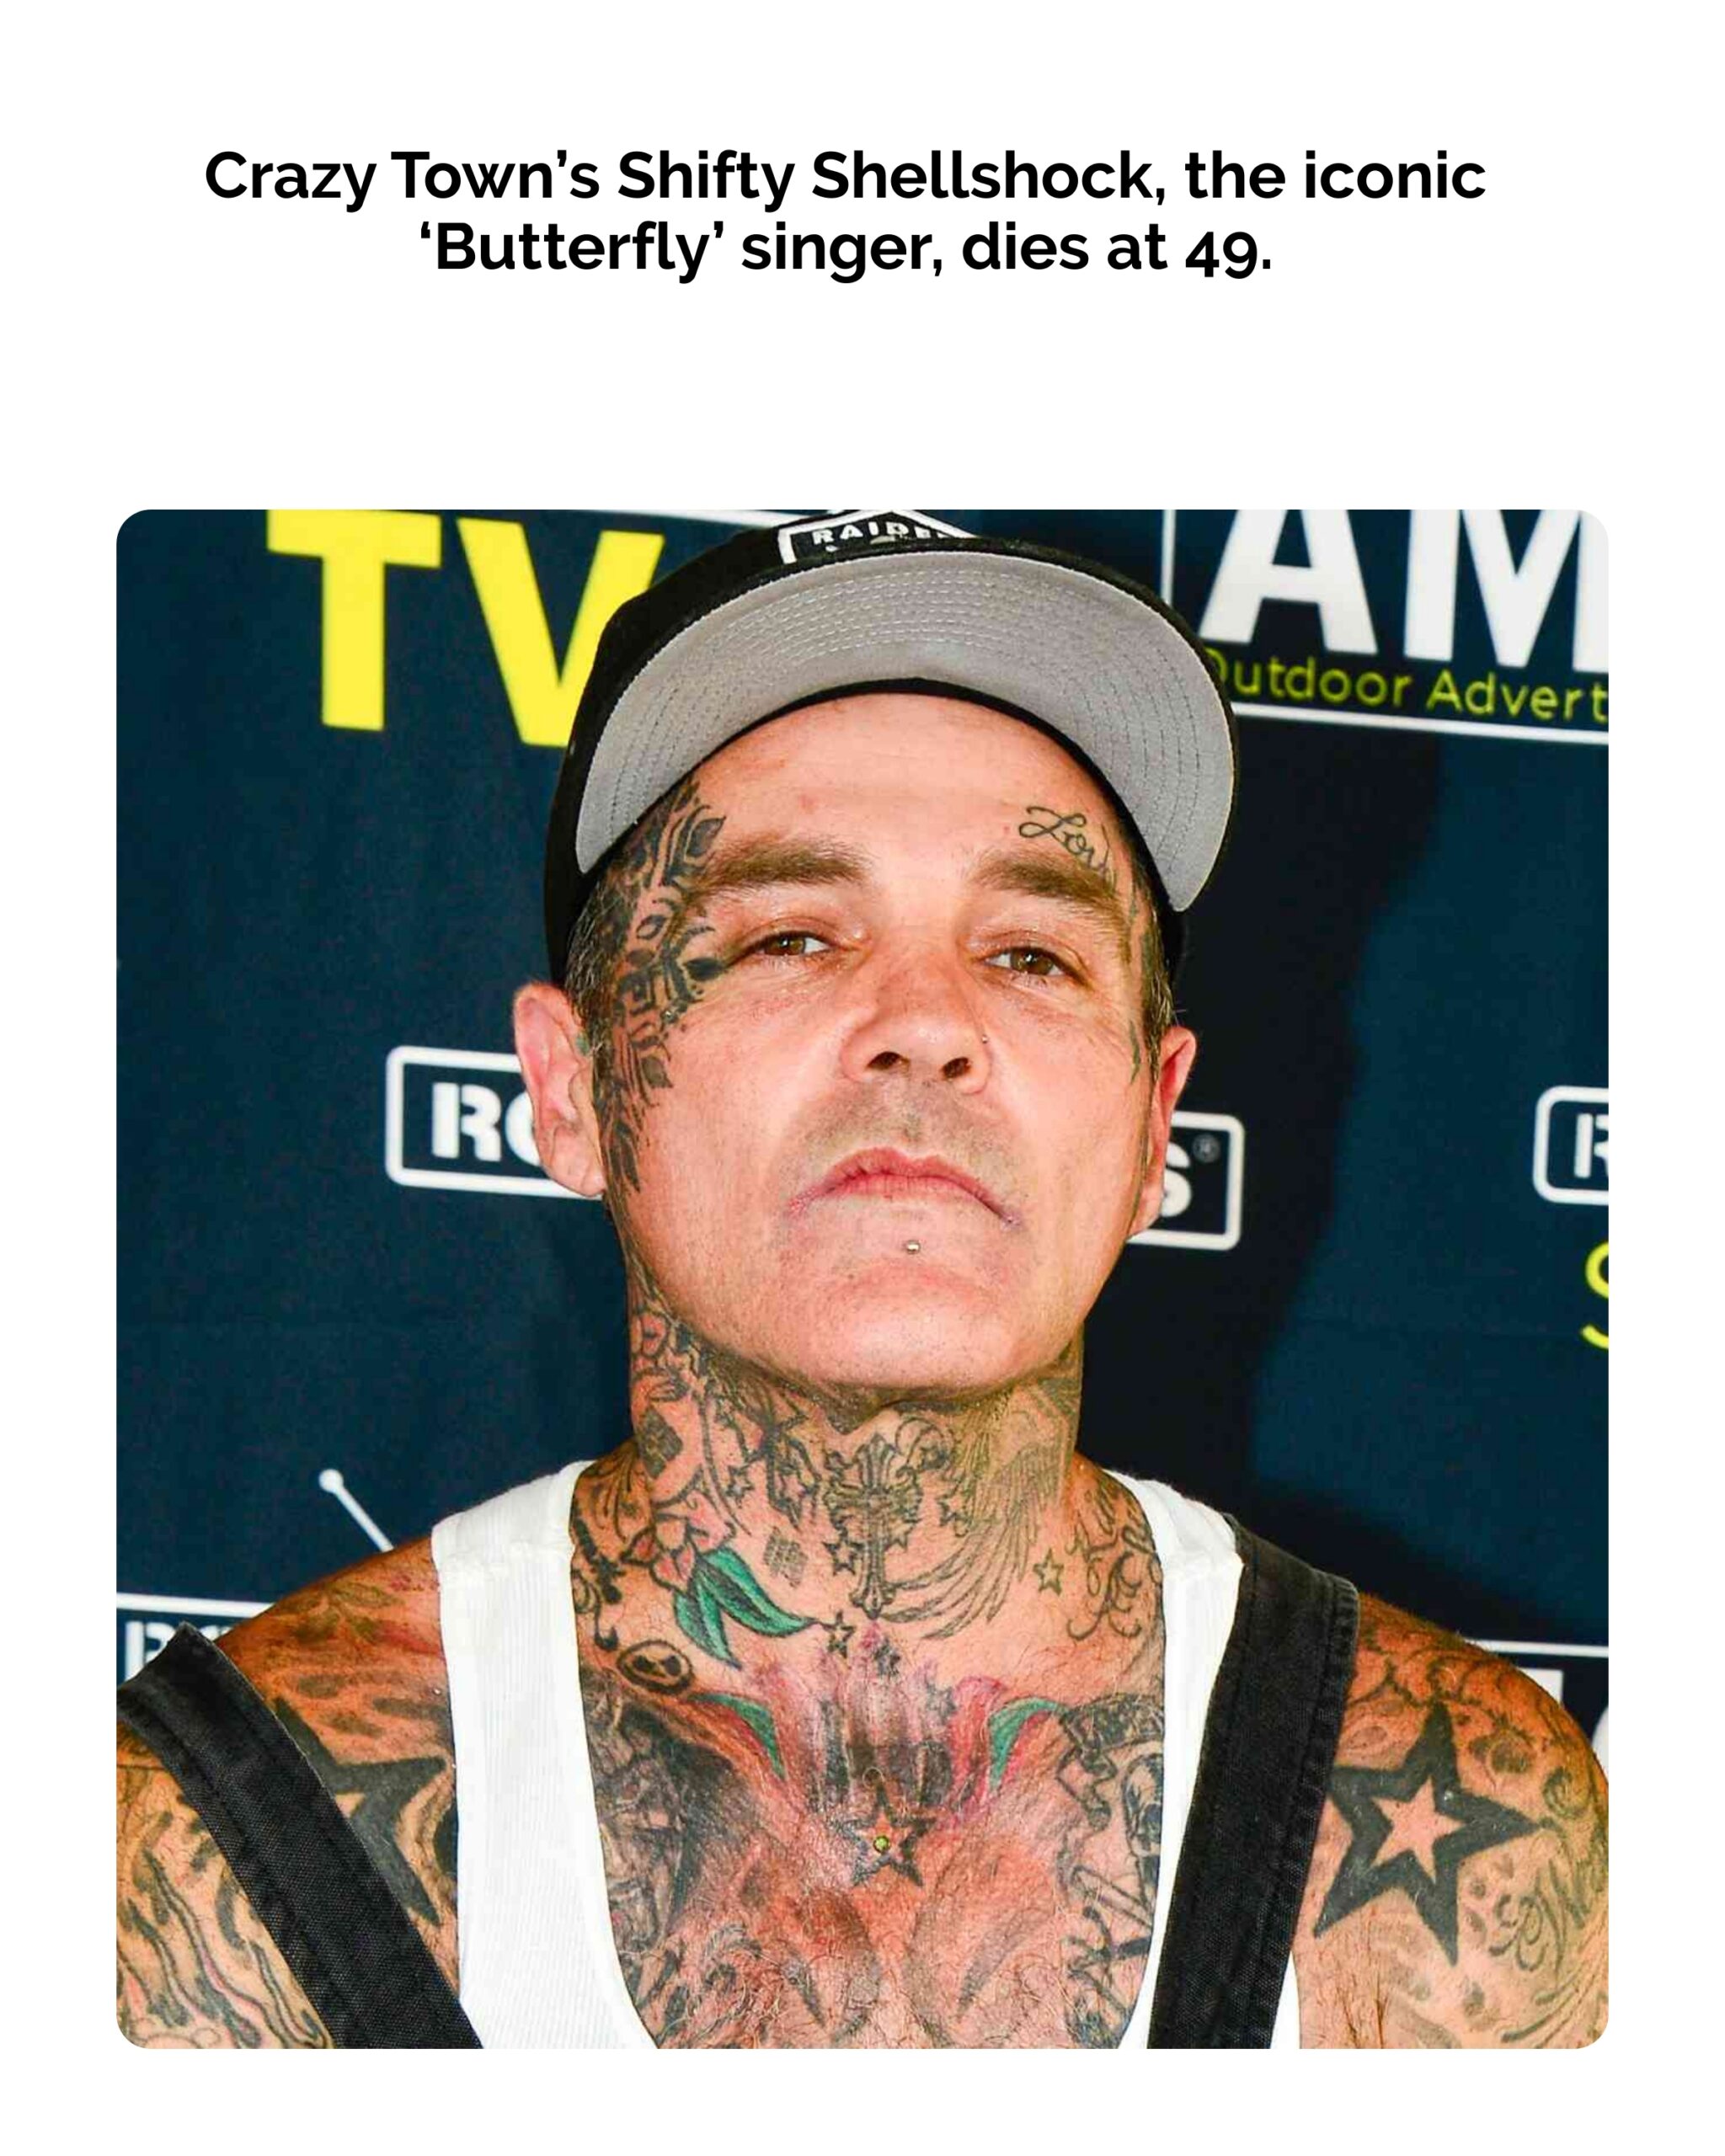 Crazy Town’s Shifty Shellshock, the iconic ‘Butterfly’ singer, dies at 49.